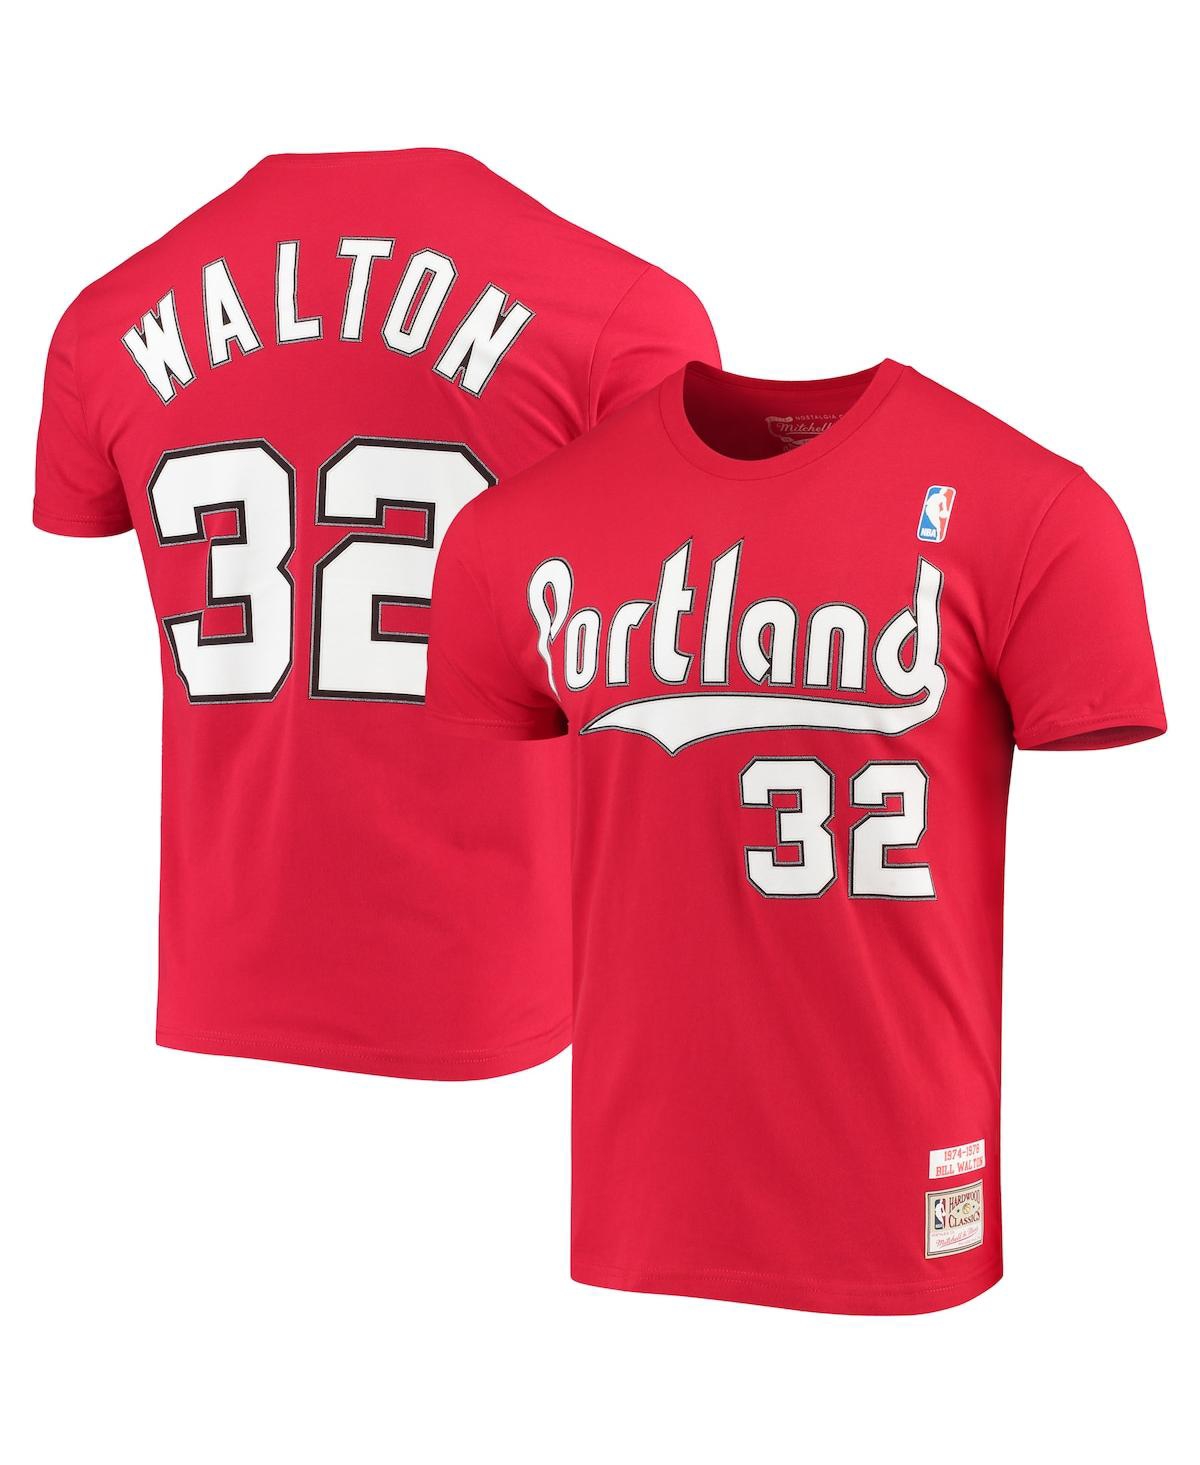 Men's Mitchell & Ness Bill Walton Red Portland Trail Blazers Hardwood Classics Player Name and Number T-shirt - Red